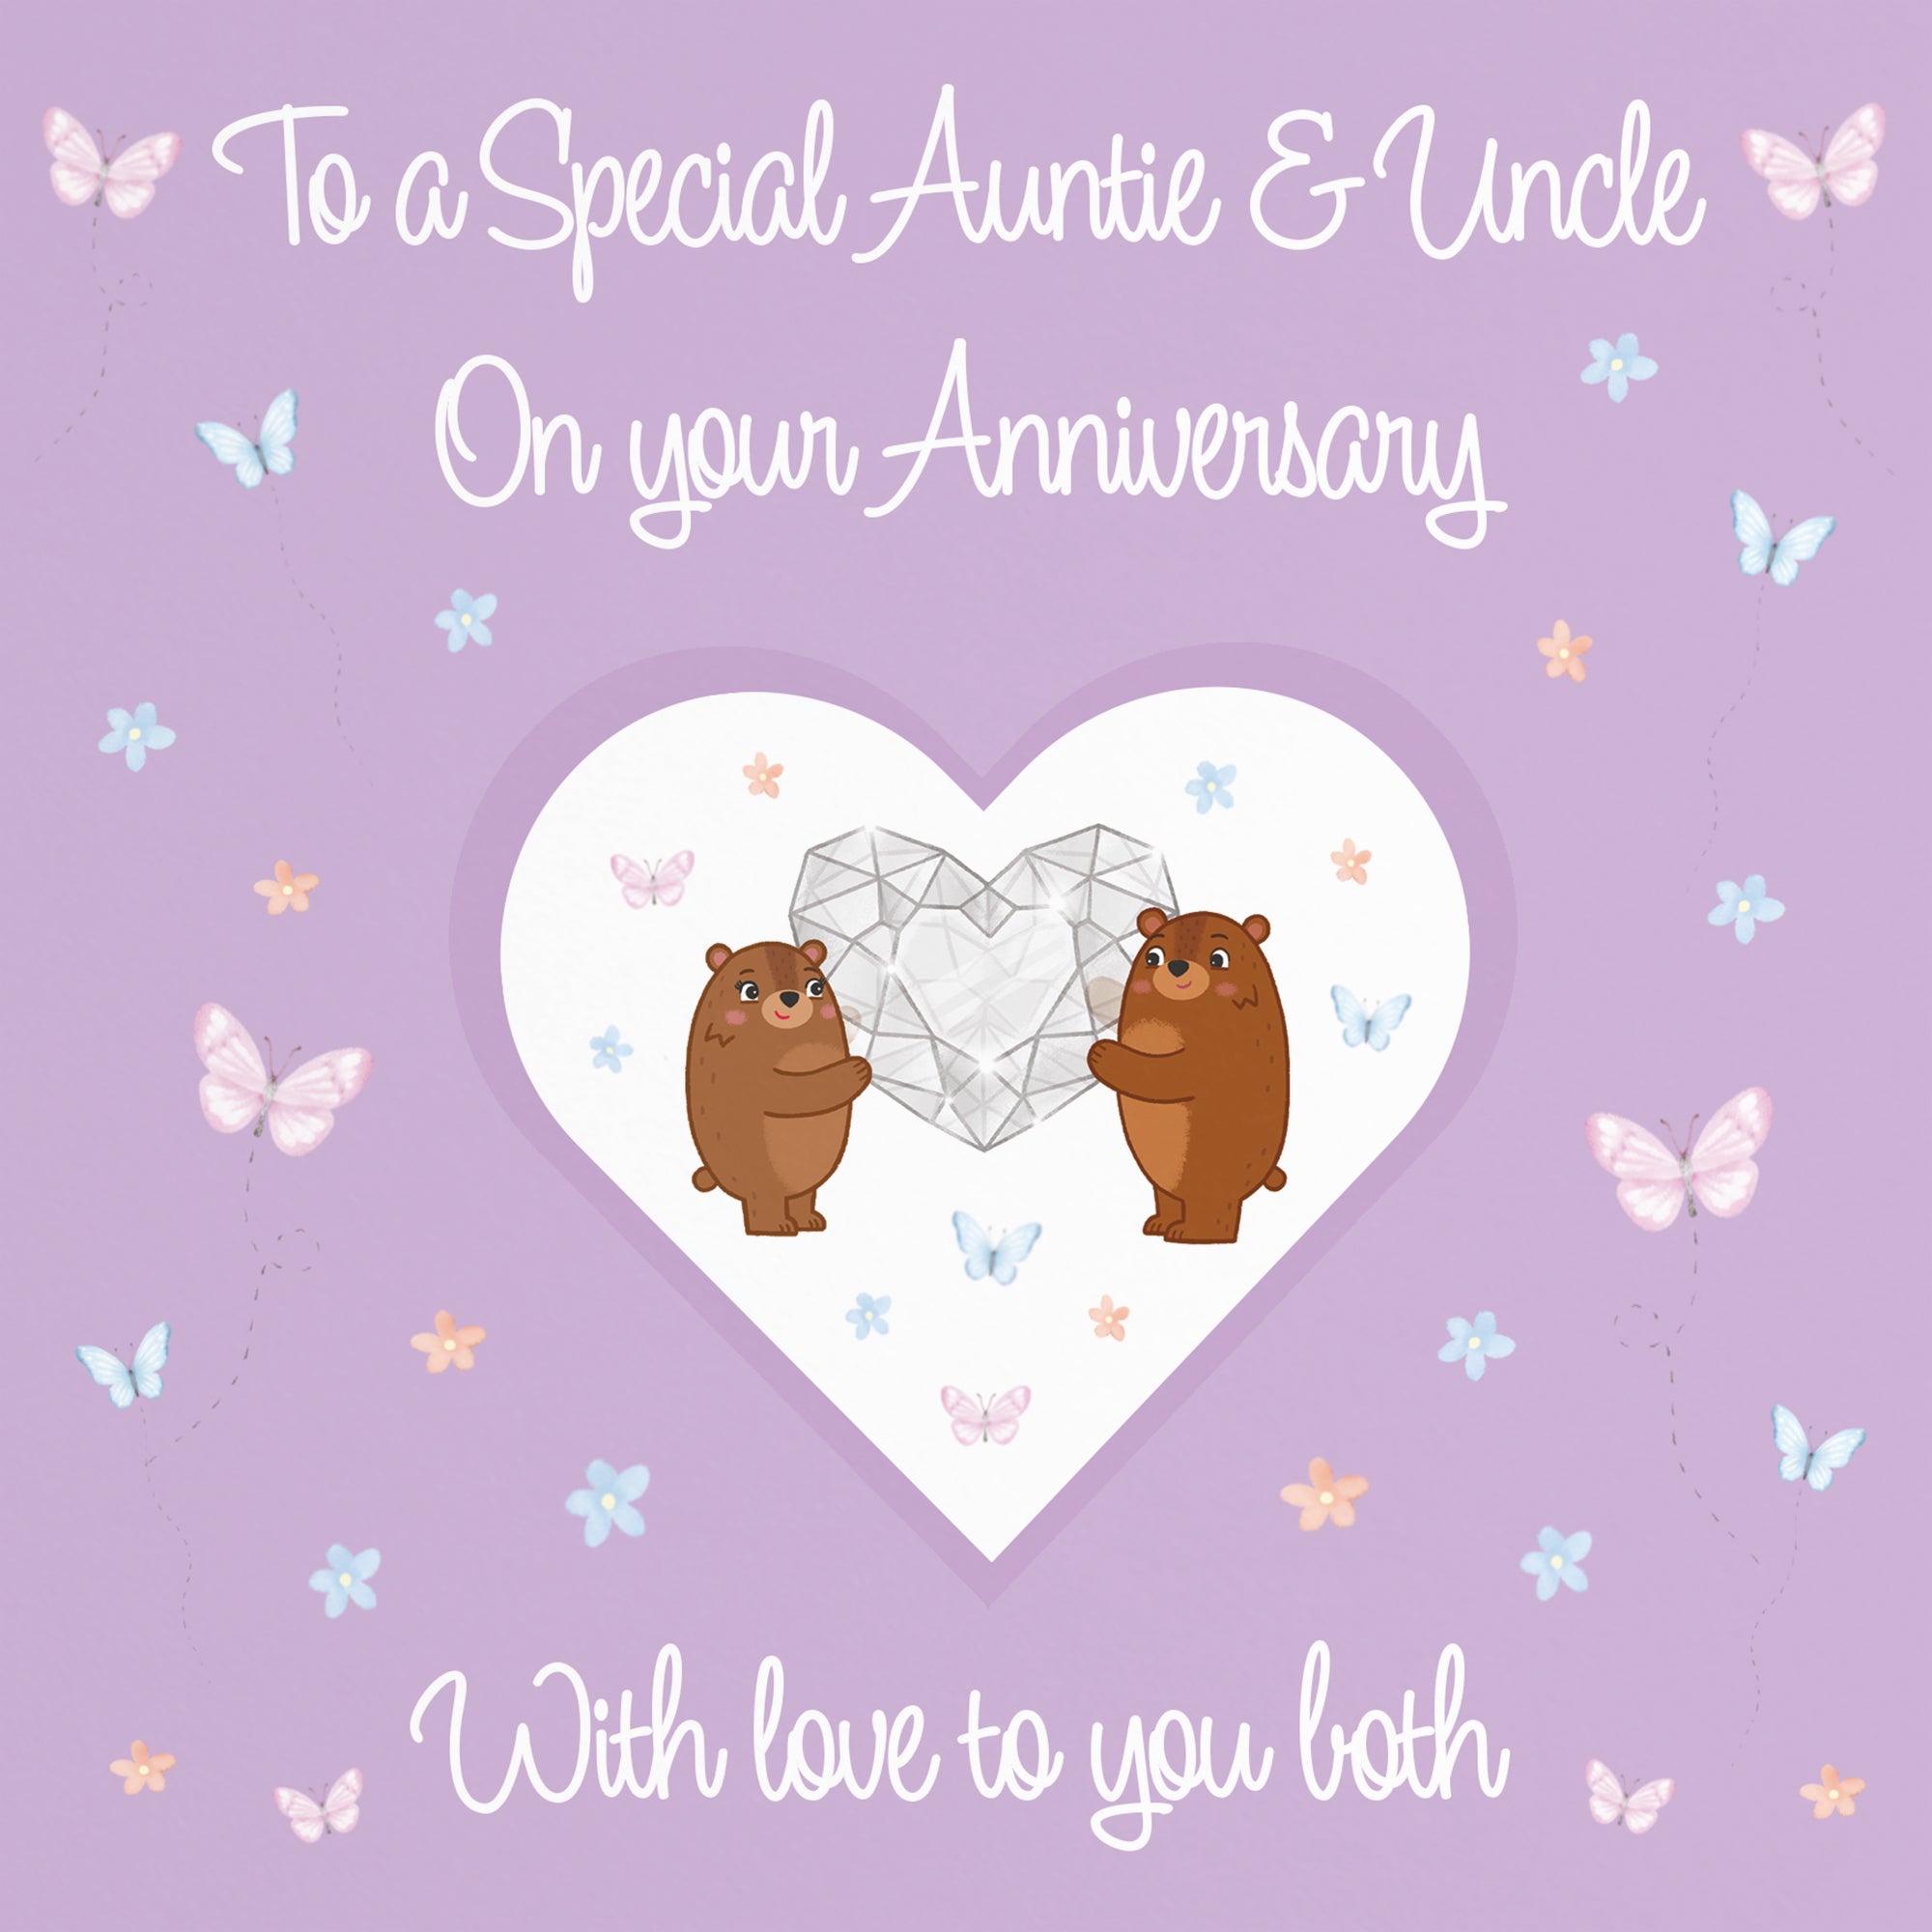 Auntie And Uncle Anniversary Card Romantic Meadows